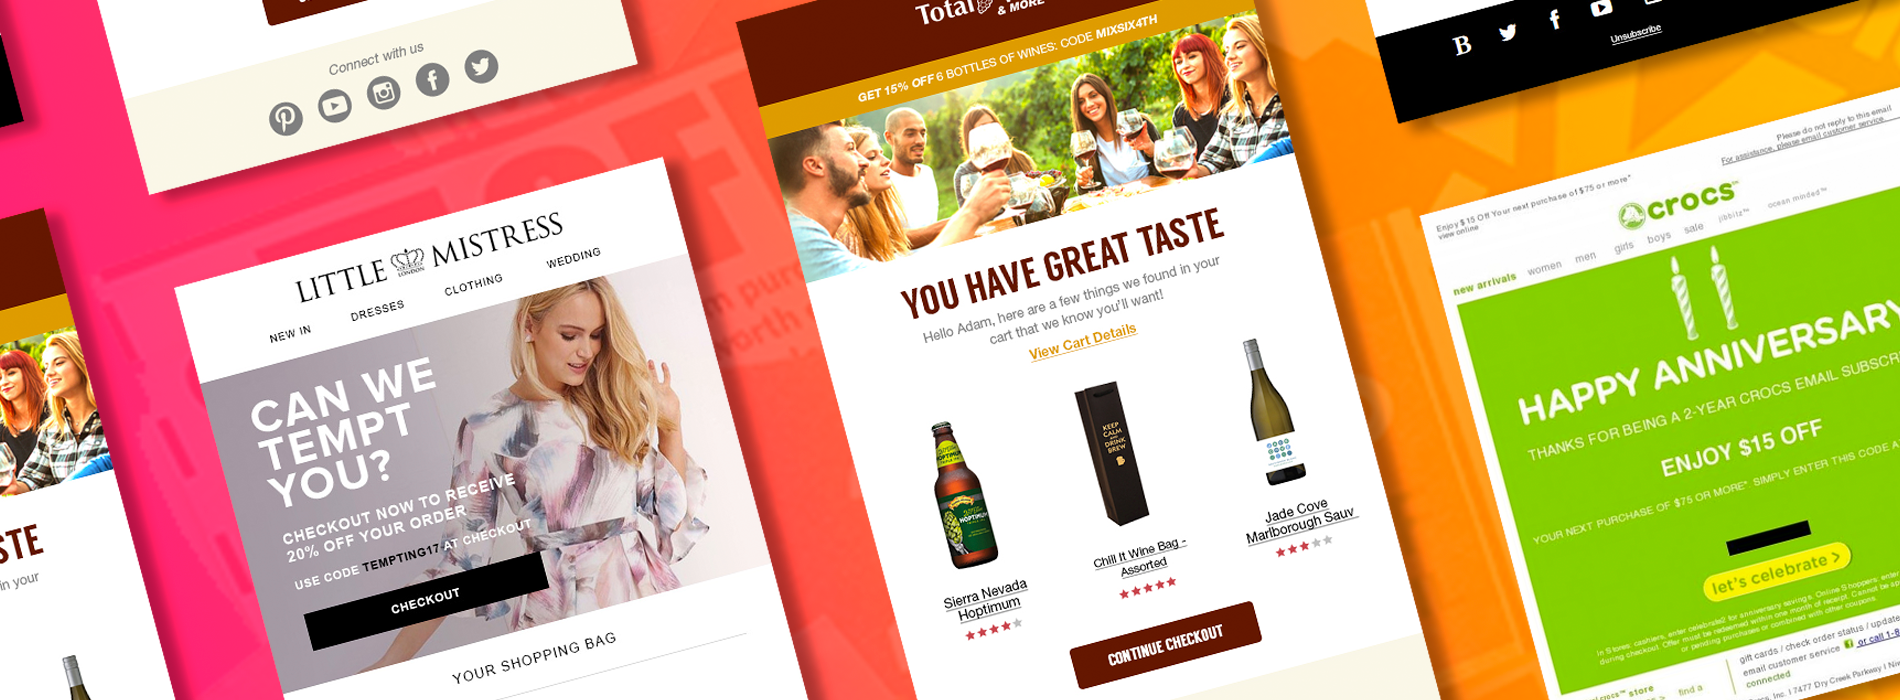 What Are Online Promo Codes? [6 Examples]